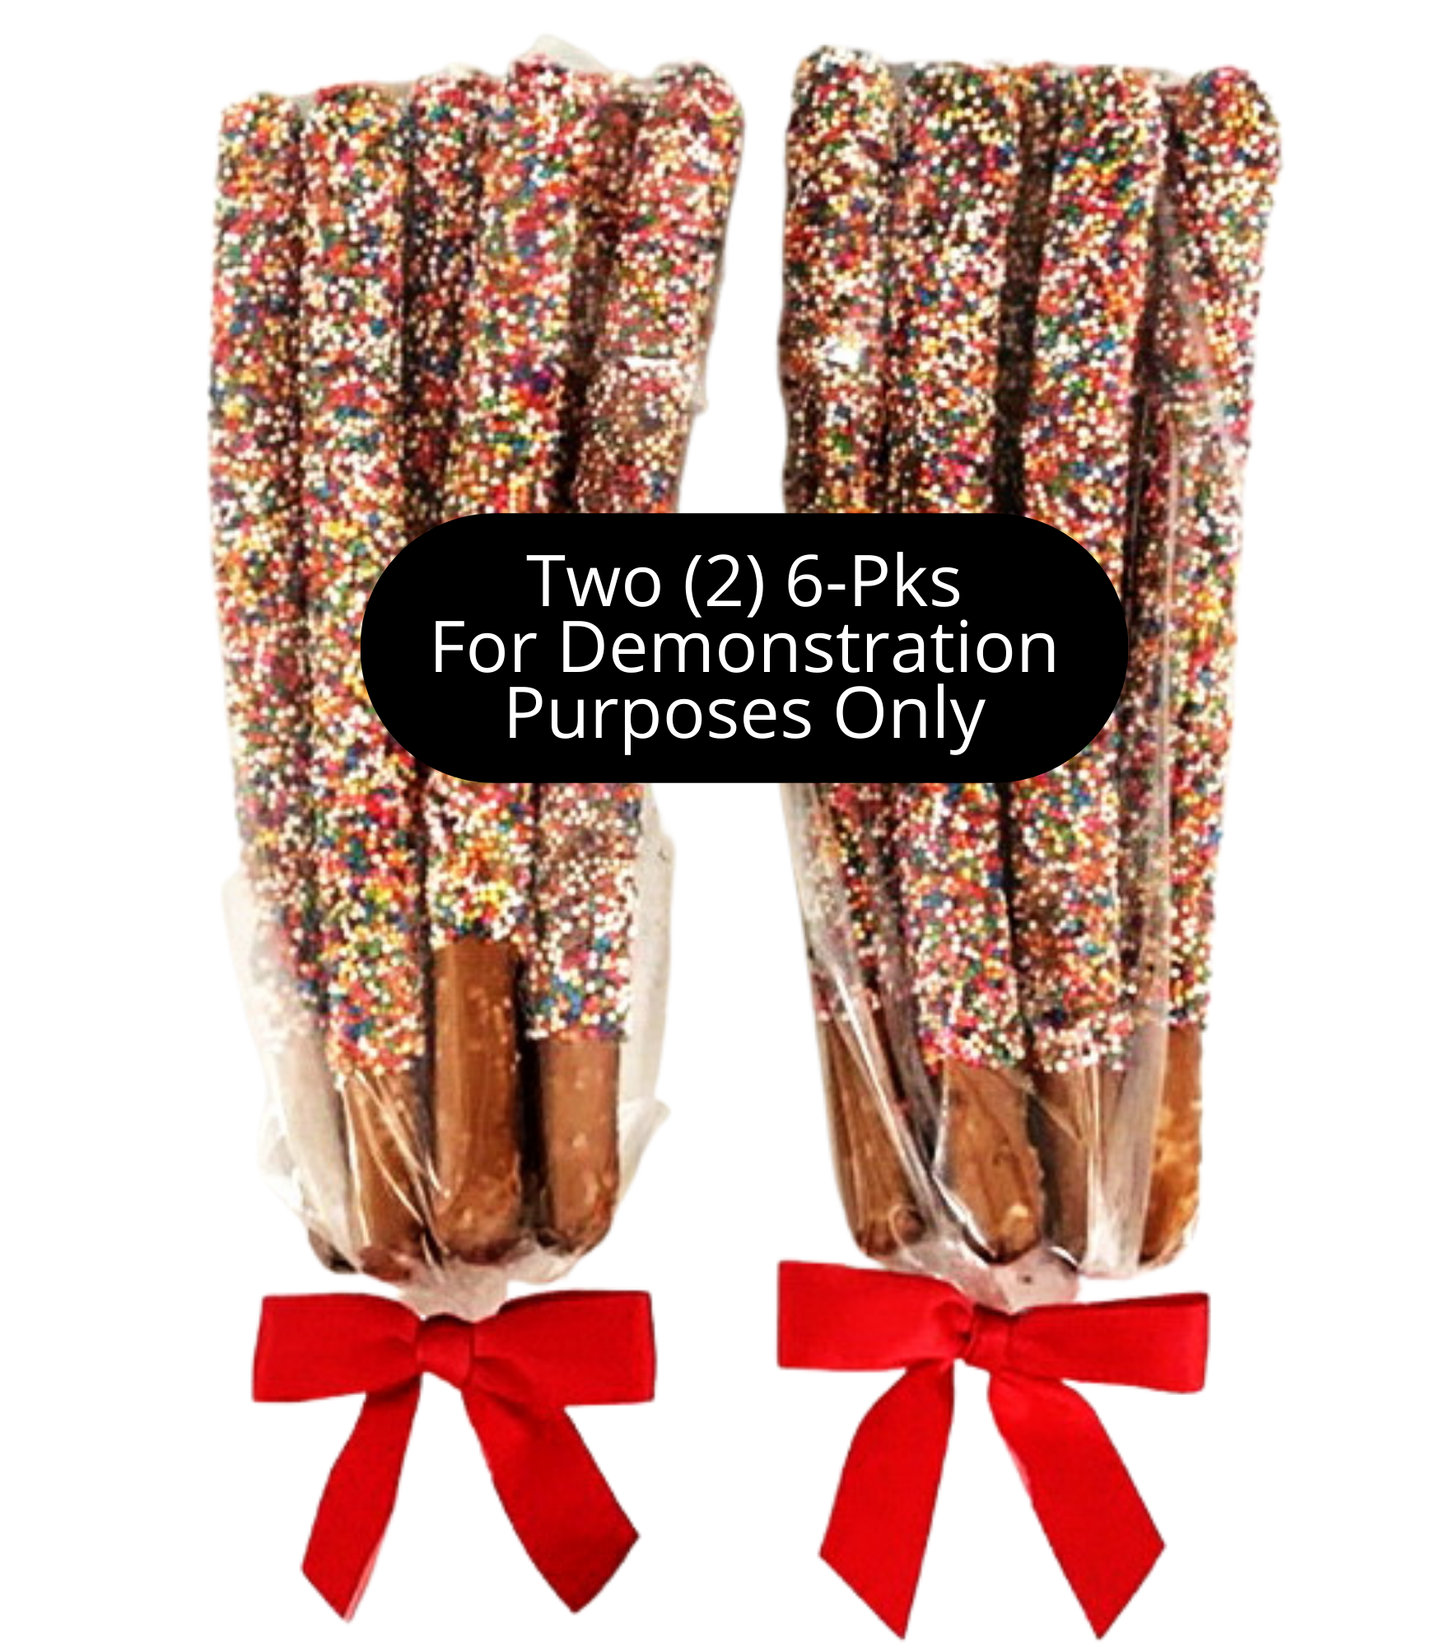 Patriotic Chocolate Covered Pretzel Rods - Topped With Red, White, & Blue Mixed Sprinkles